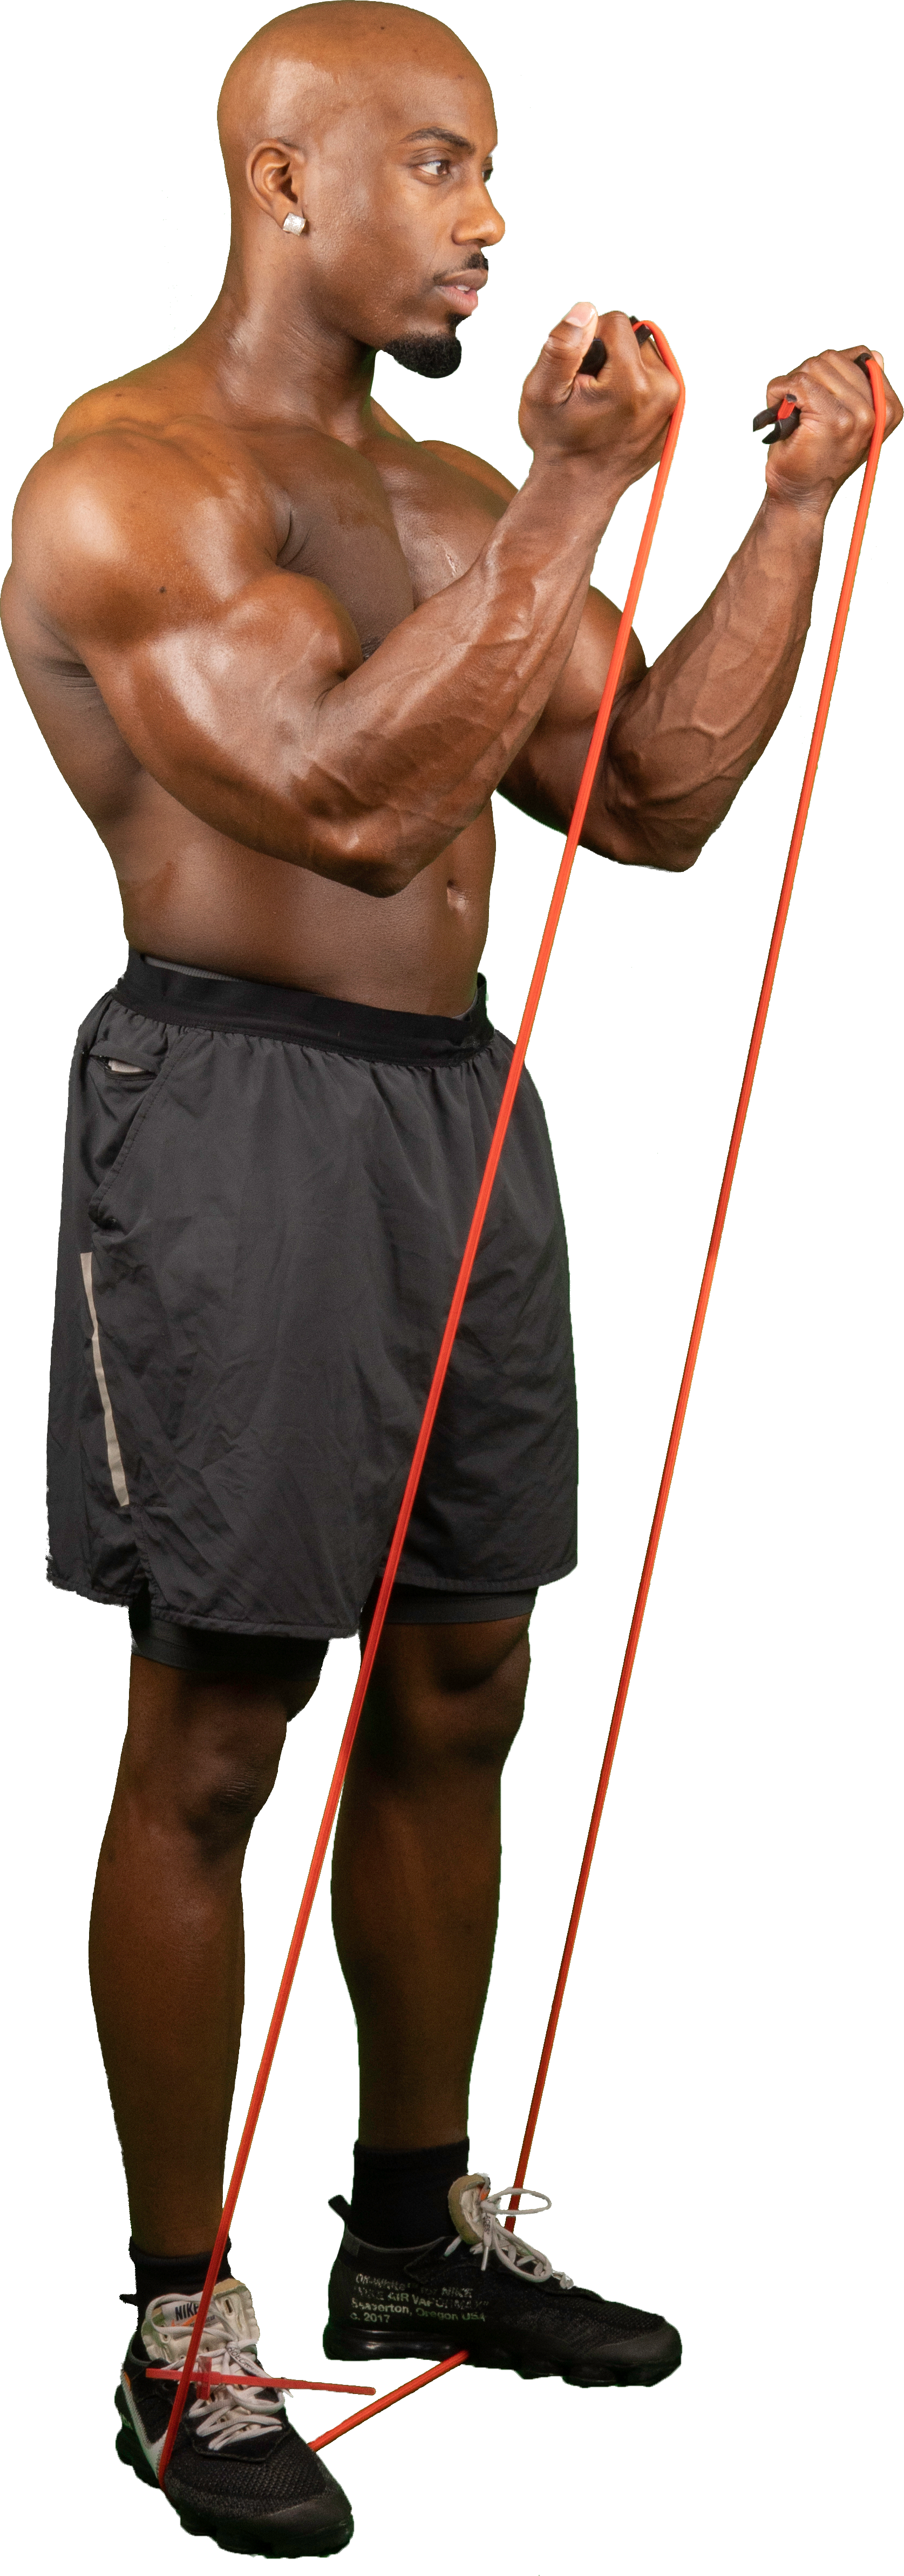 Strength Training with DovFlex Rope